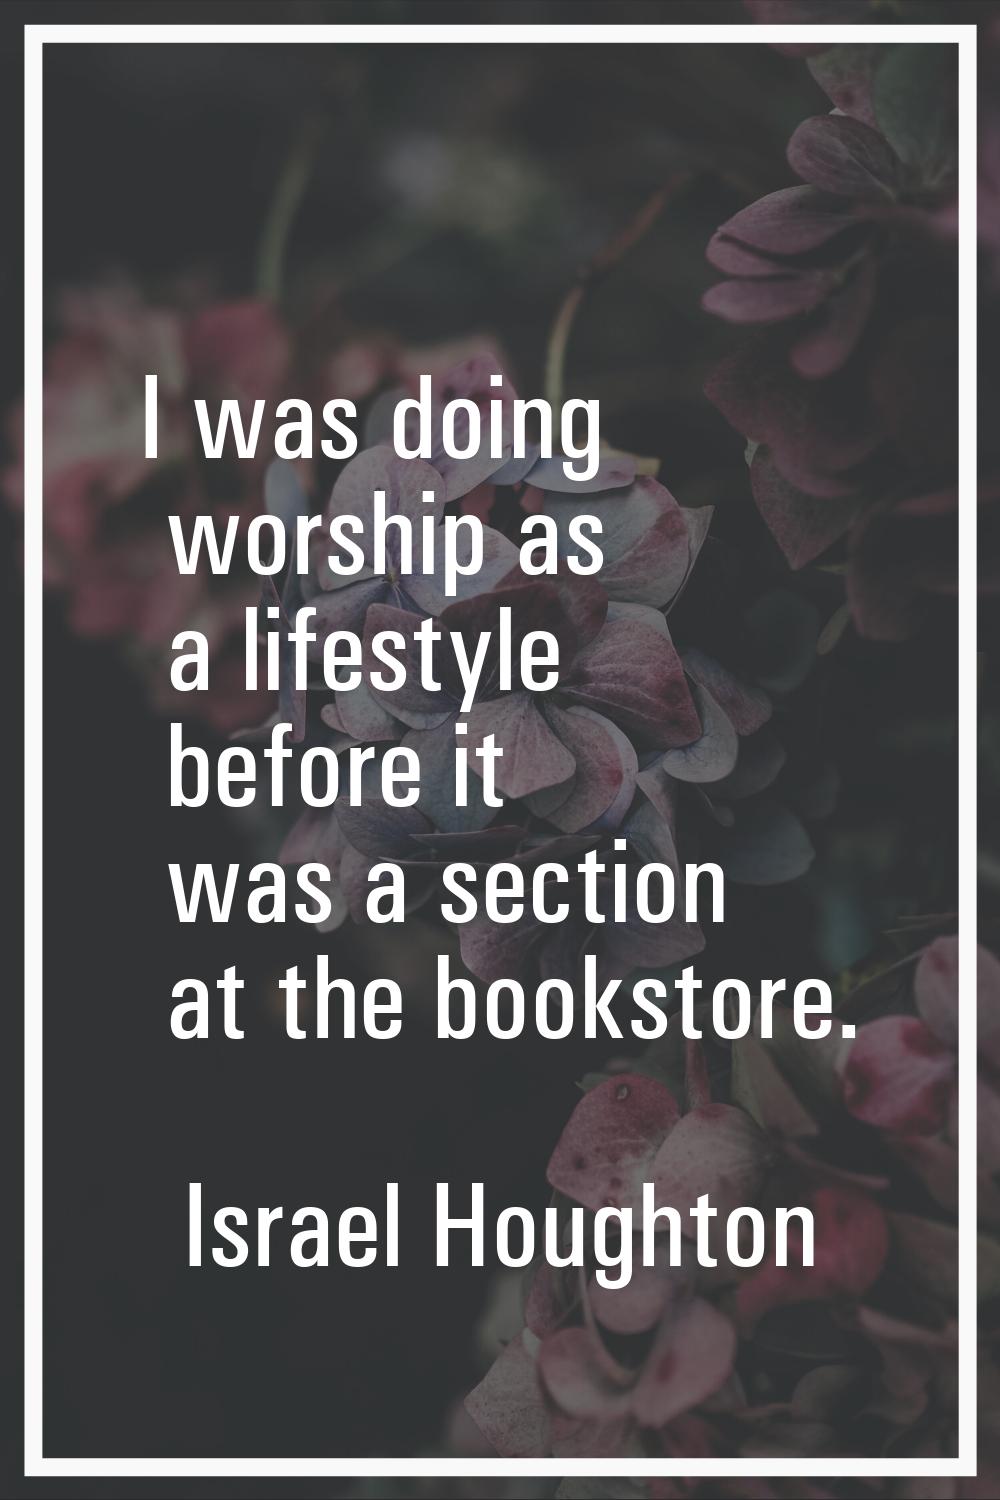 I was doing worship as a lifestyle before it was a section at the bookstore.